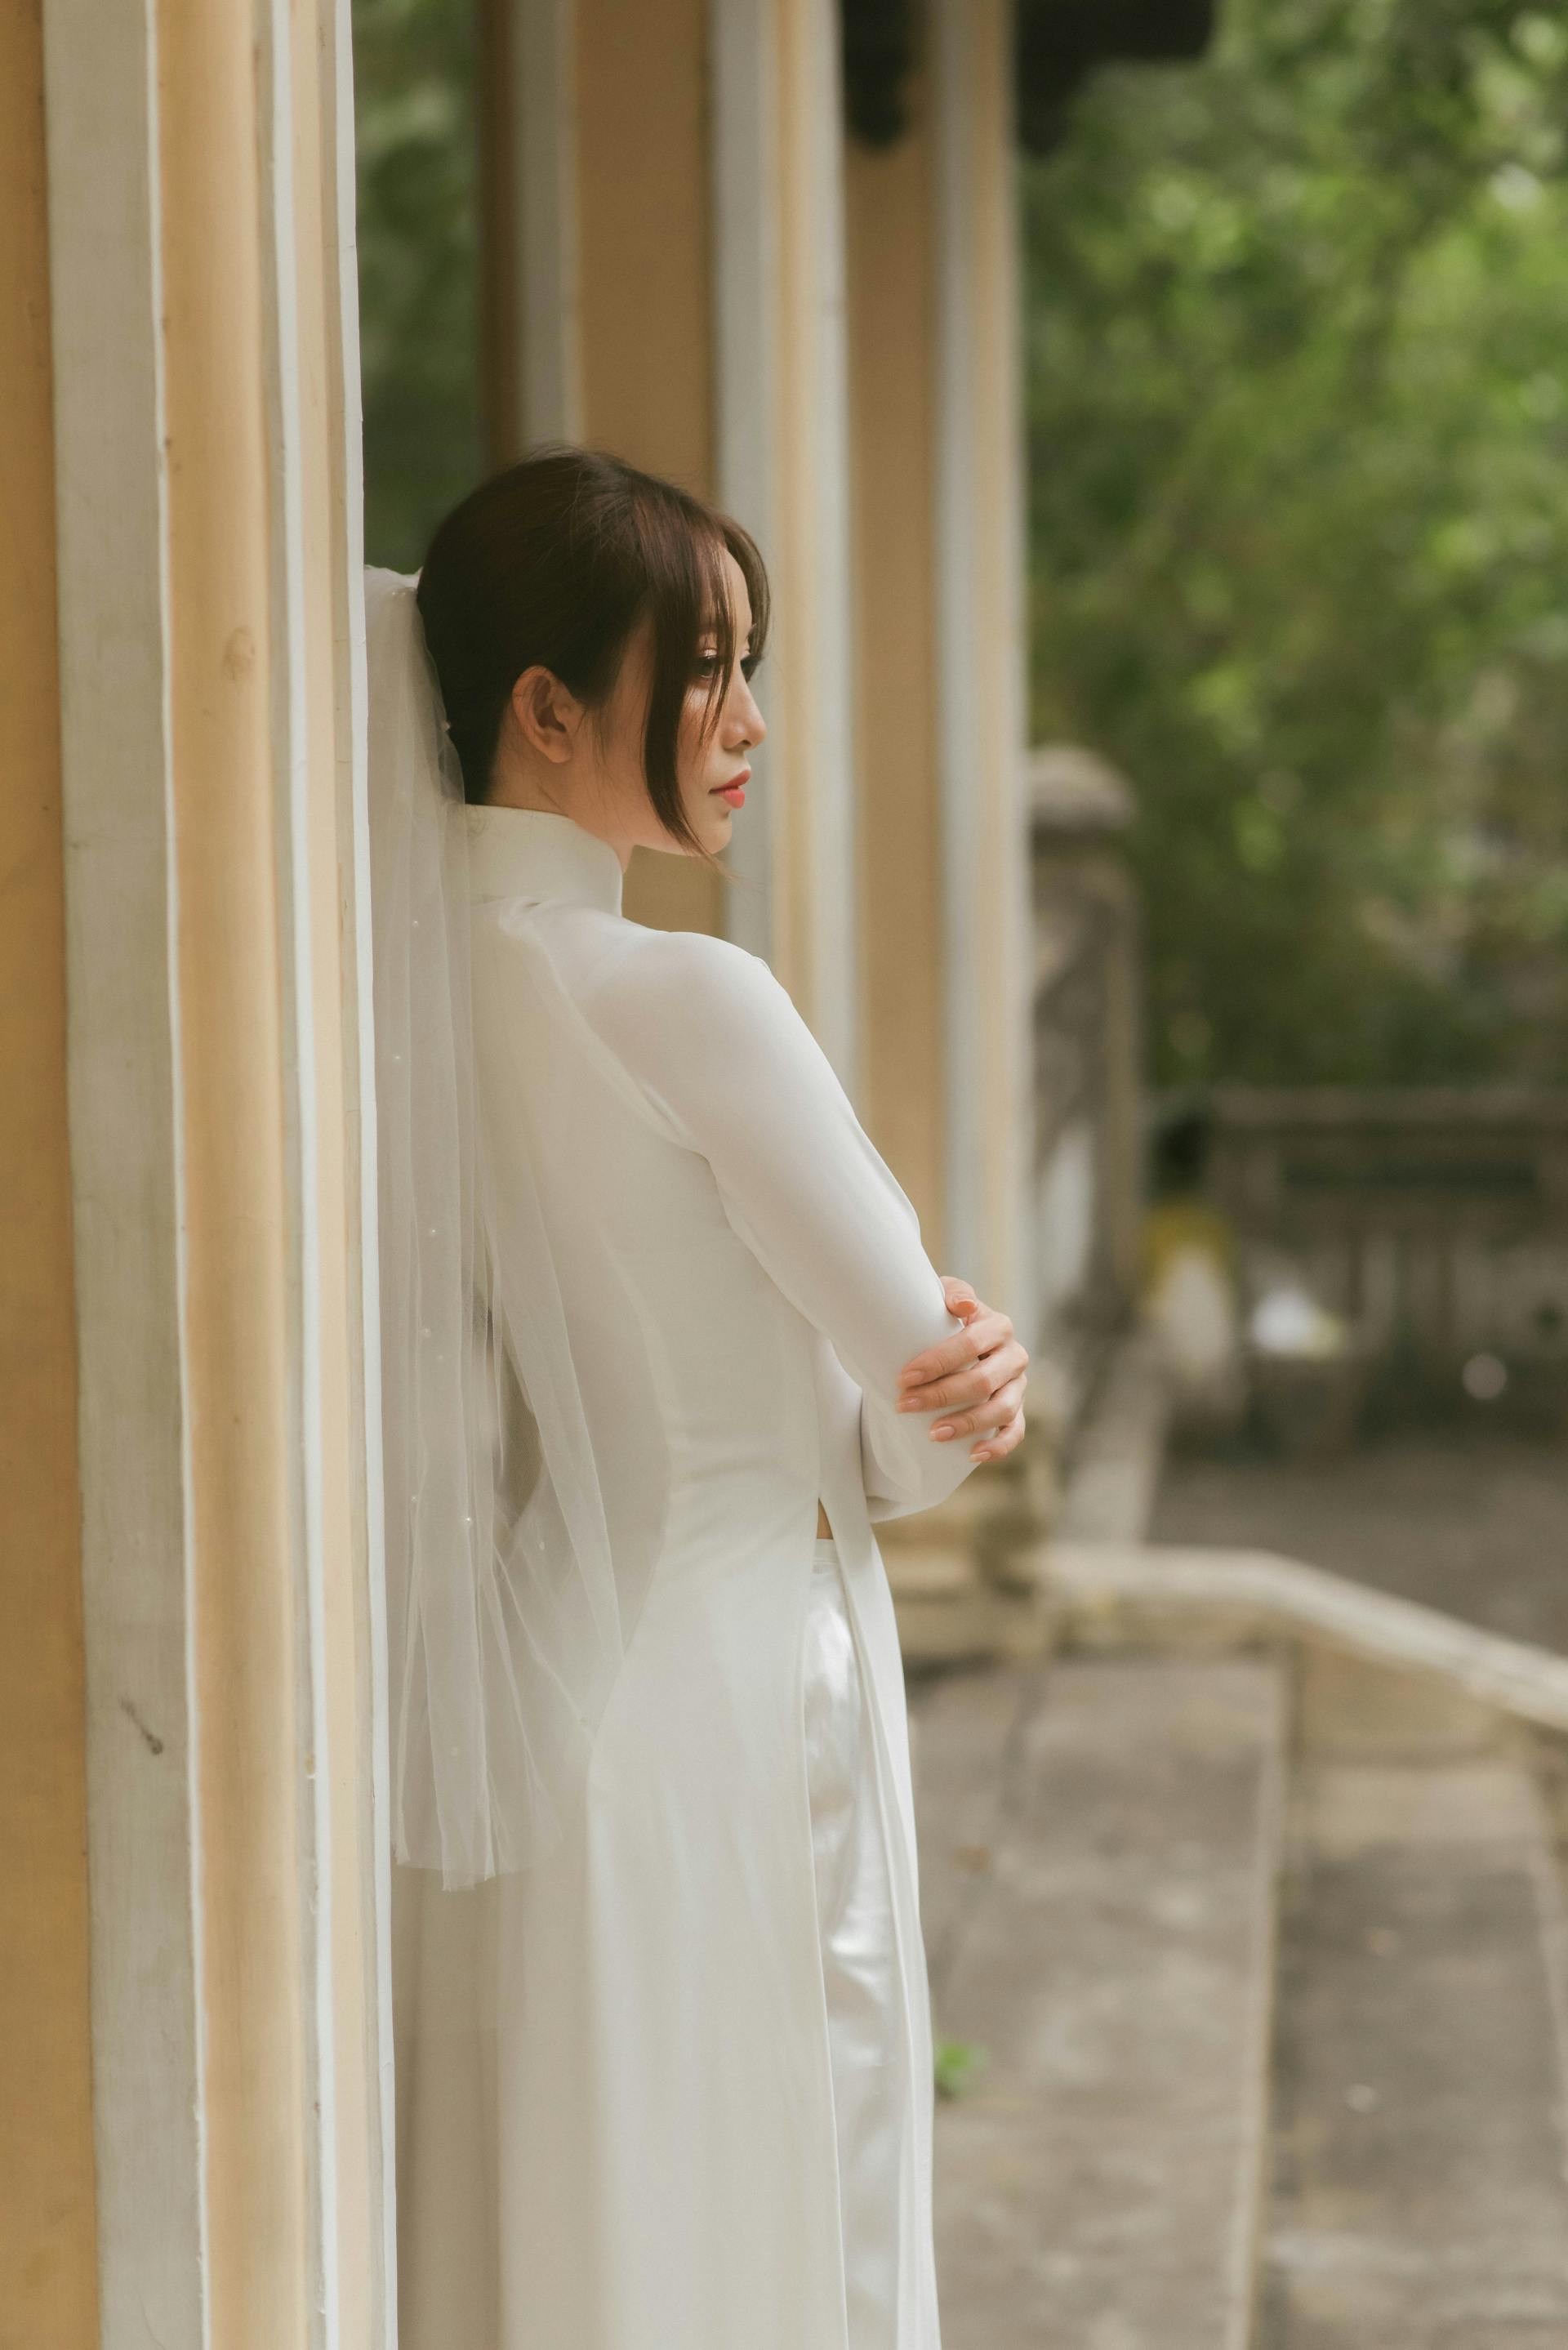 A woman in a bridal dress leaning against a wall | Source: Pexels